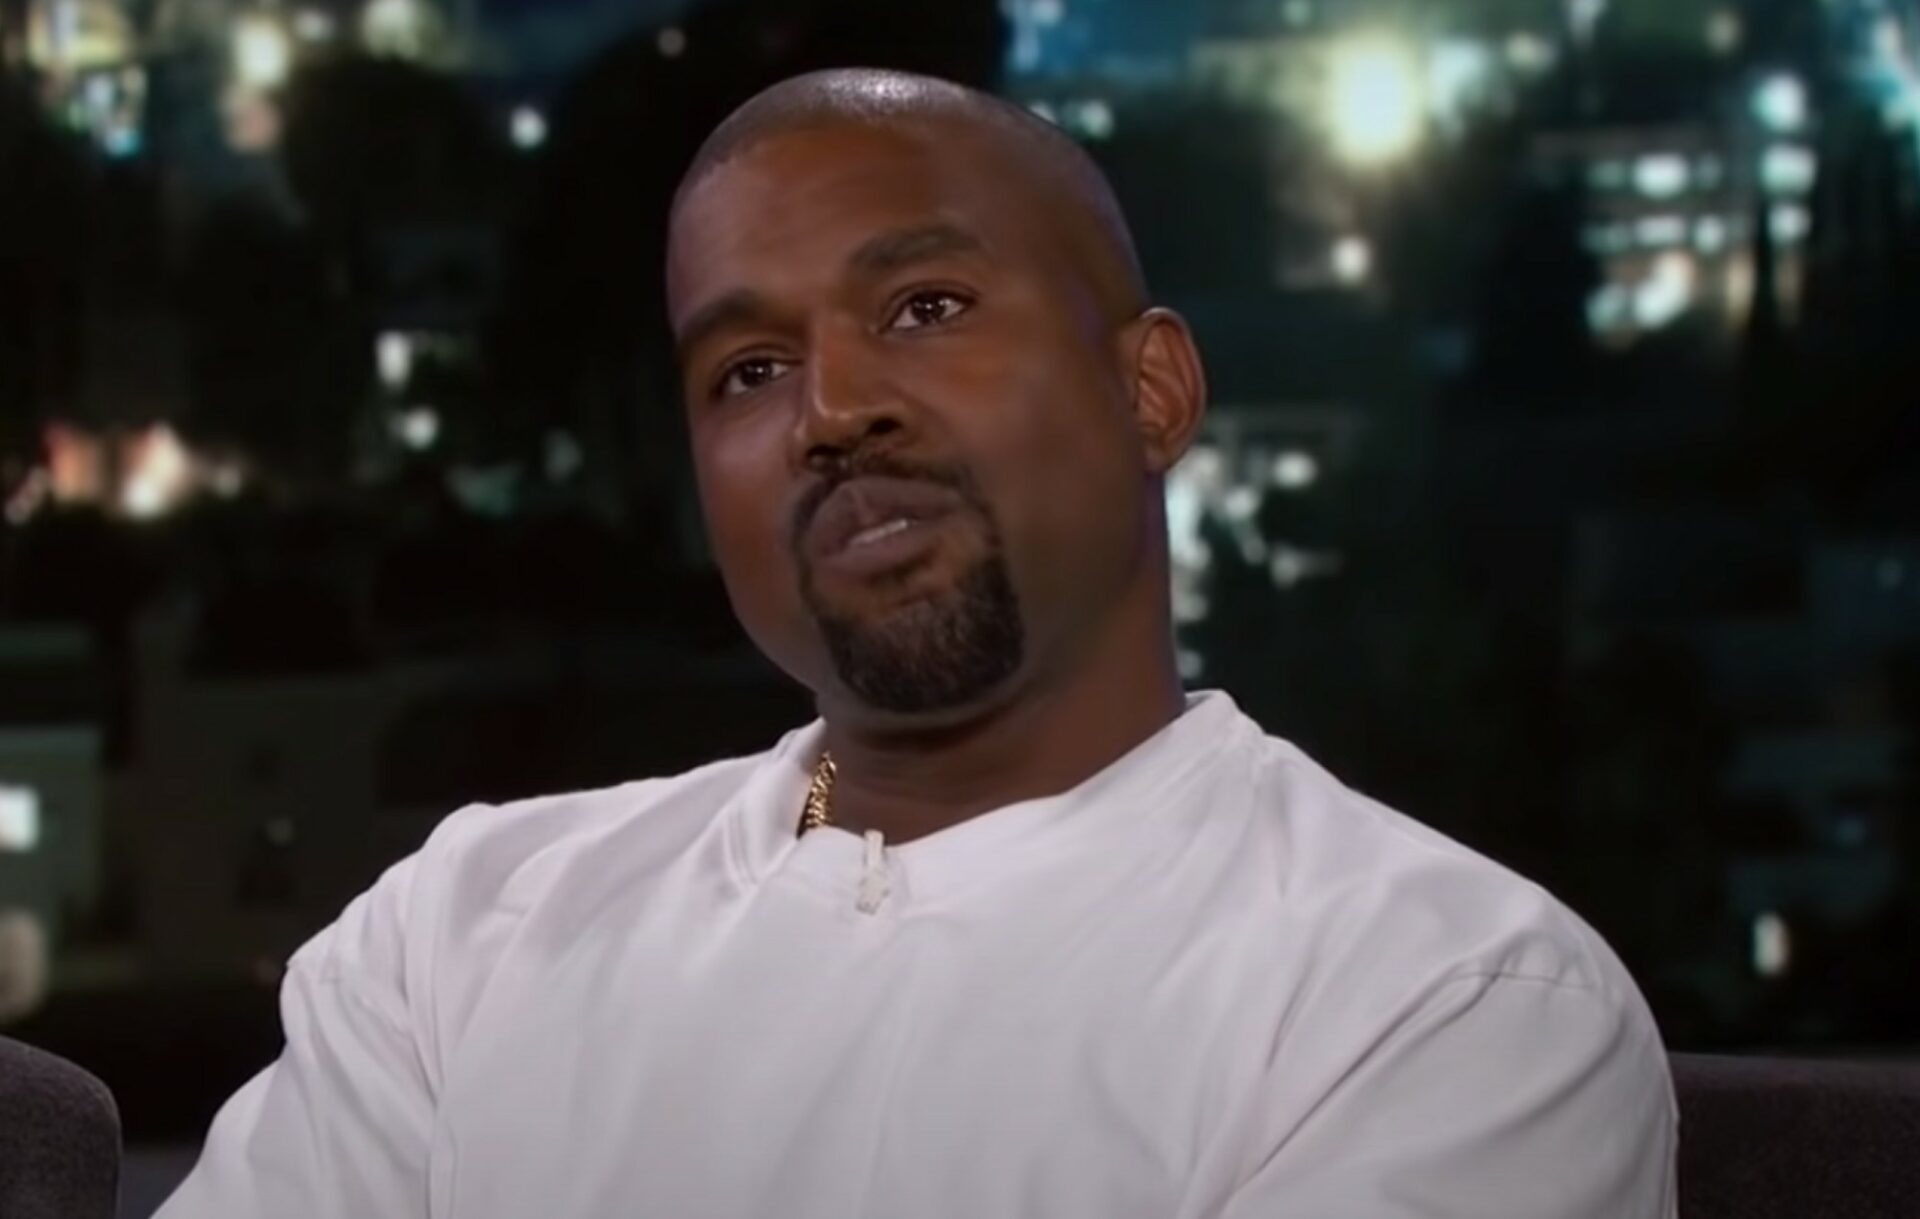 Kanye West Stokes Controversy With 'White Lives Matter' Shirts - WSJ